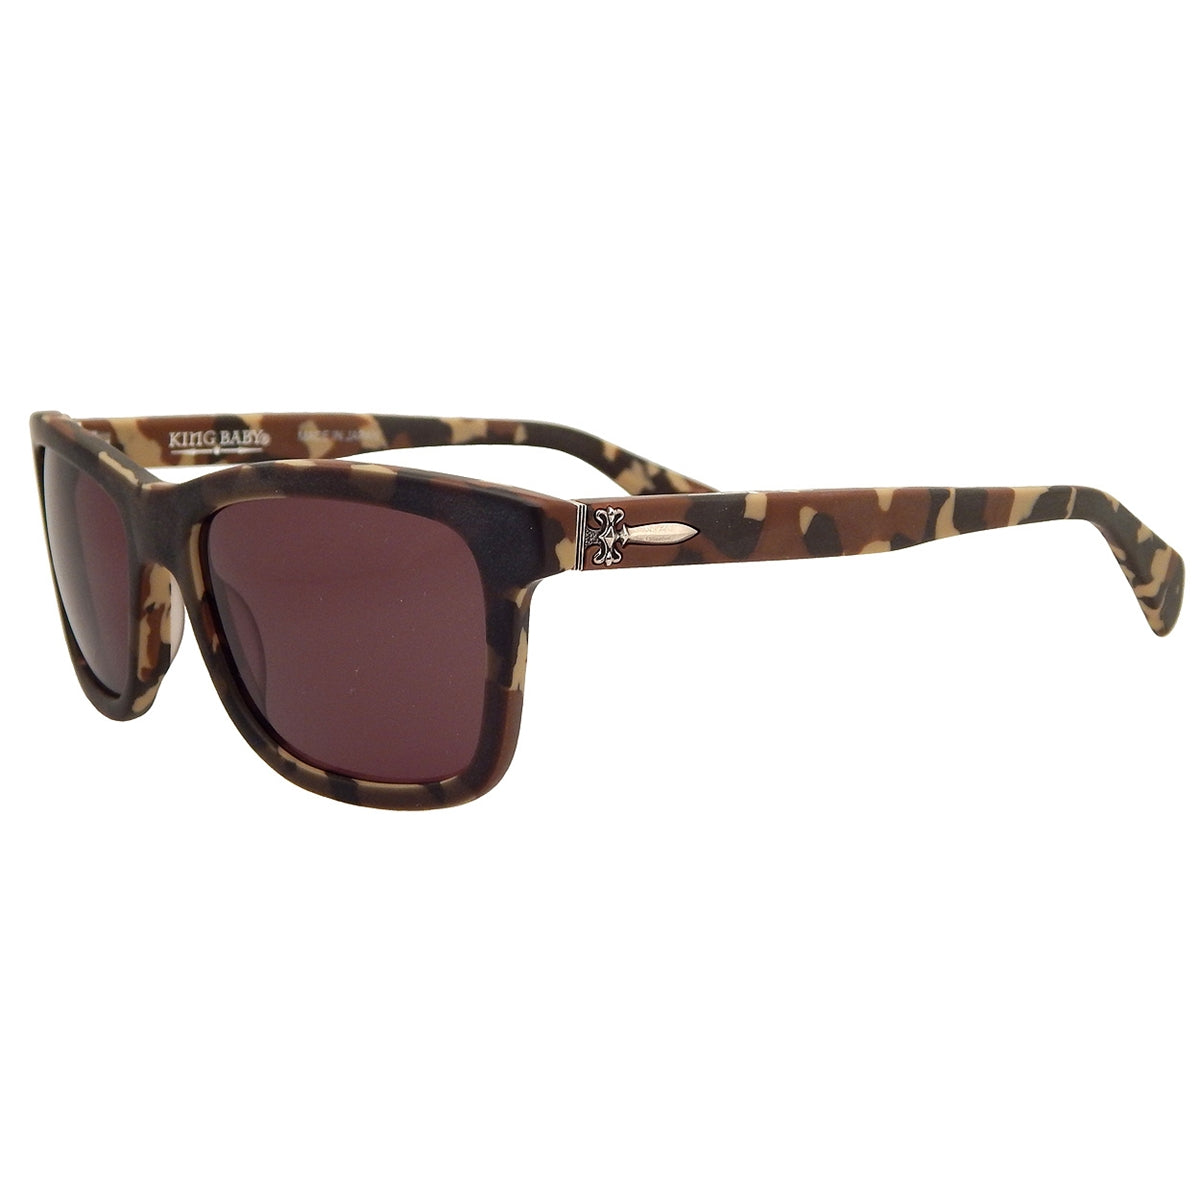 KING BABY EYEWEAR - &quot;T-BONE&quot; Sunglasses in CAMO with Sterling Silver DAGGER